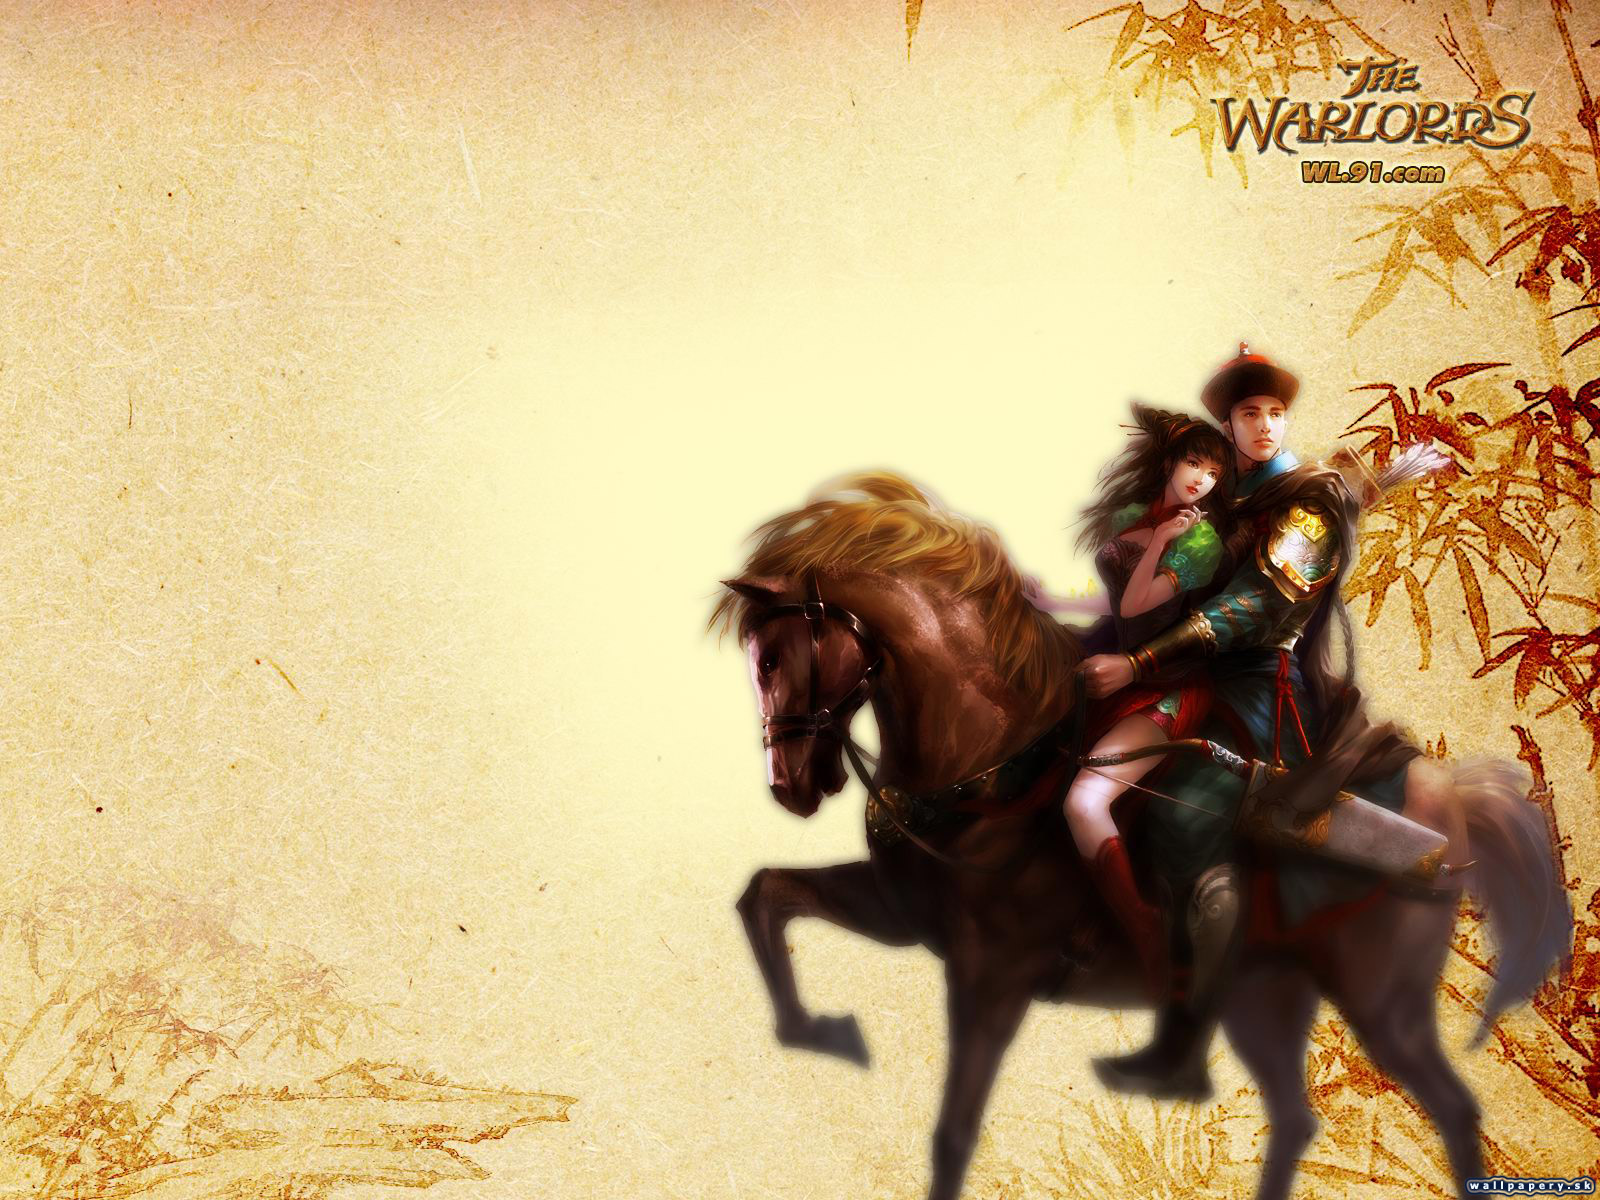 The Warlords - wallpaper 26